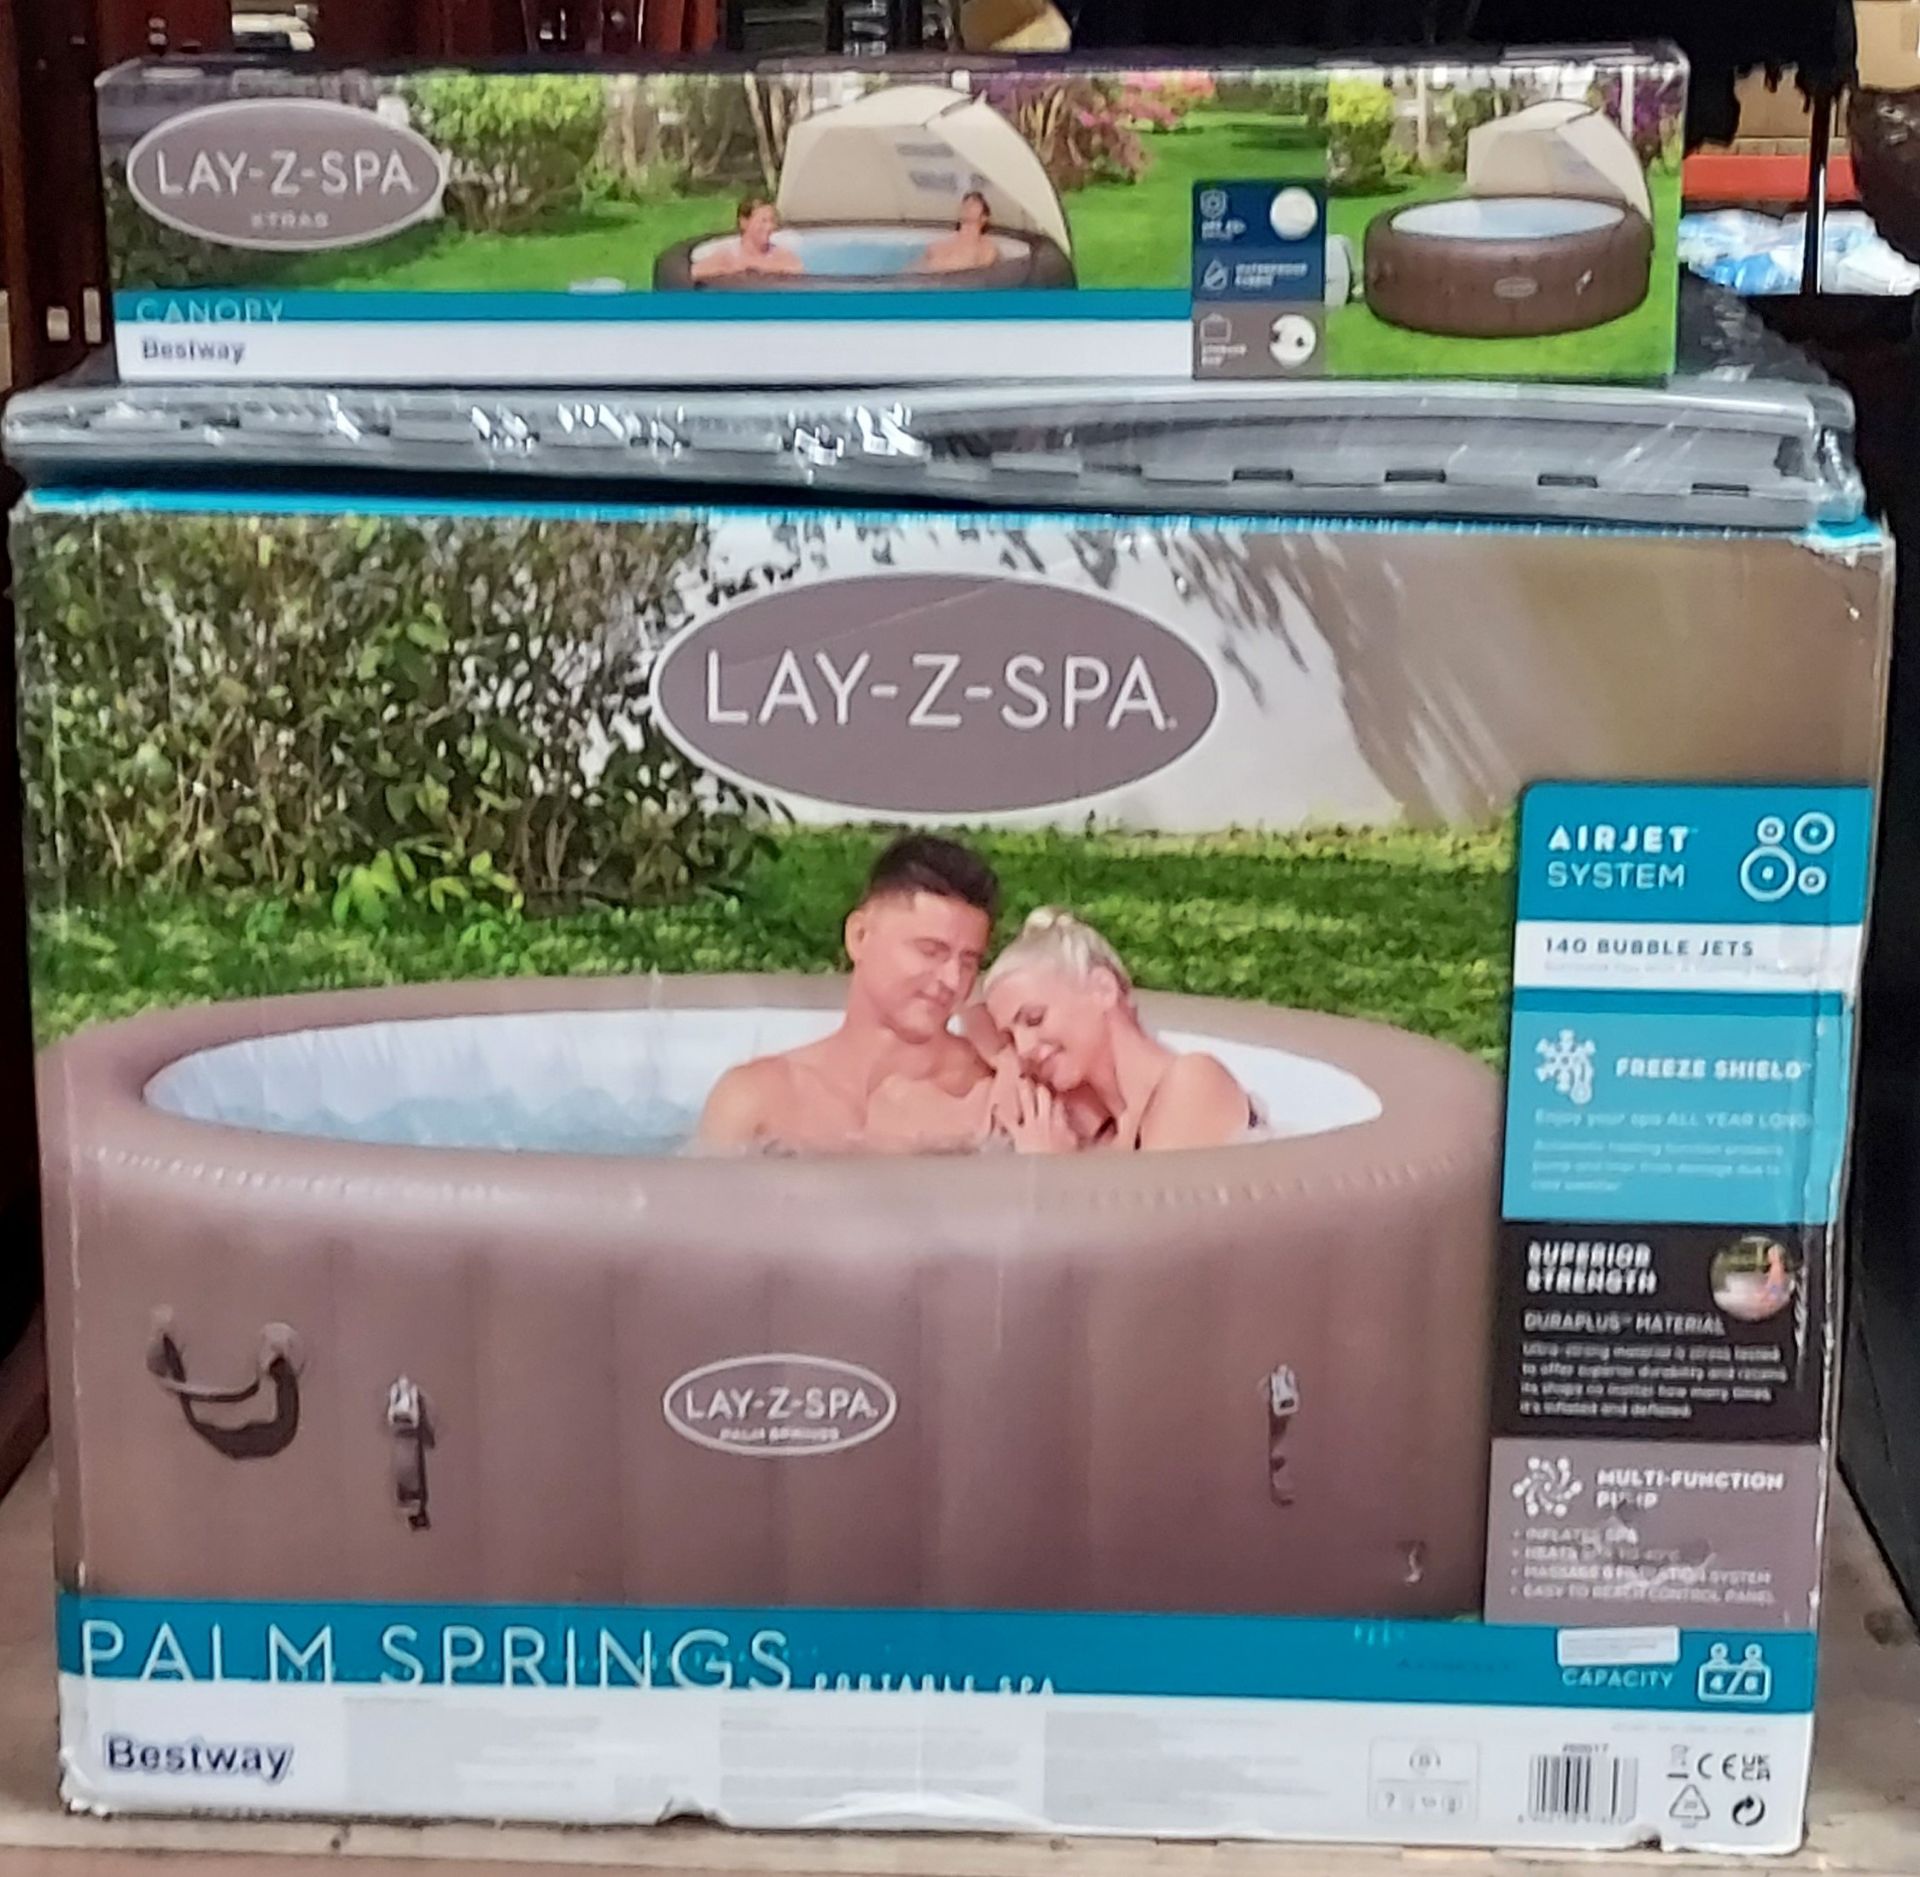 1 X BRAND NEW LAY-Z-SPA PALM SPRINGS PORTABLE SPA - AIR JET SYSTEM - WITH DIGITAL CONTROL PANEL -140 - Image 4 of 5